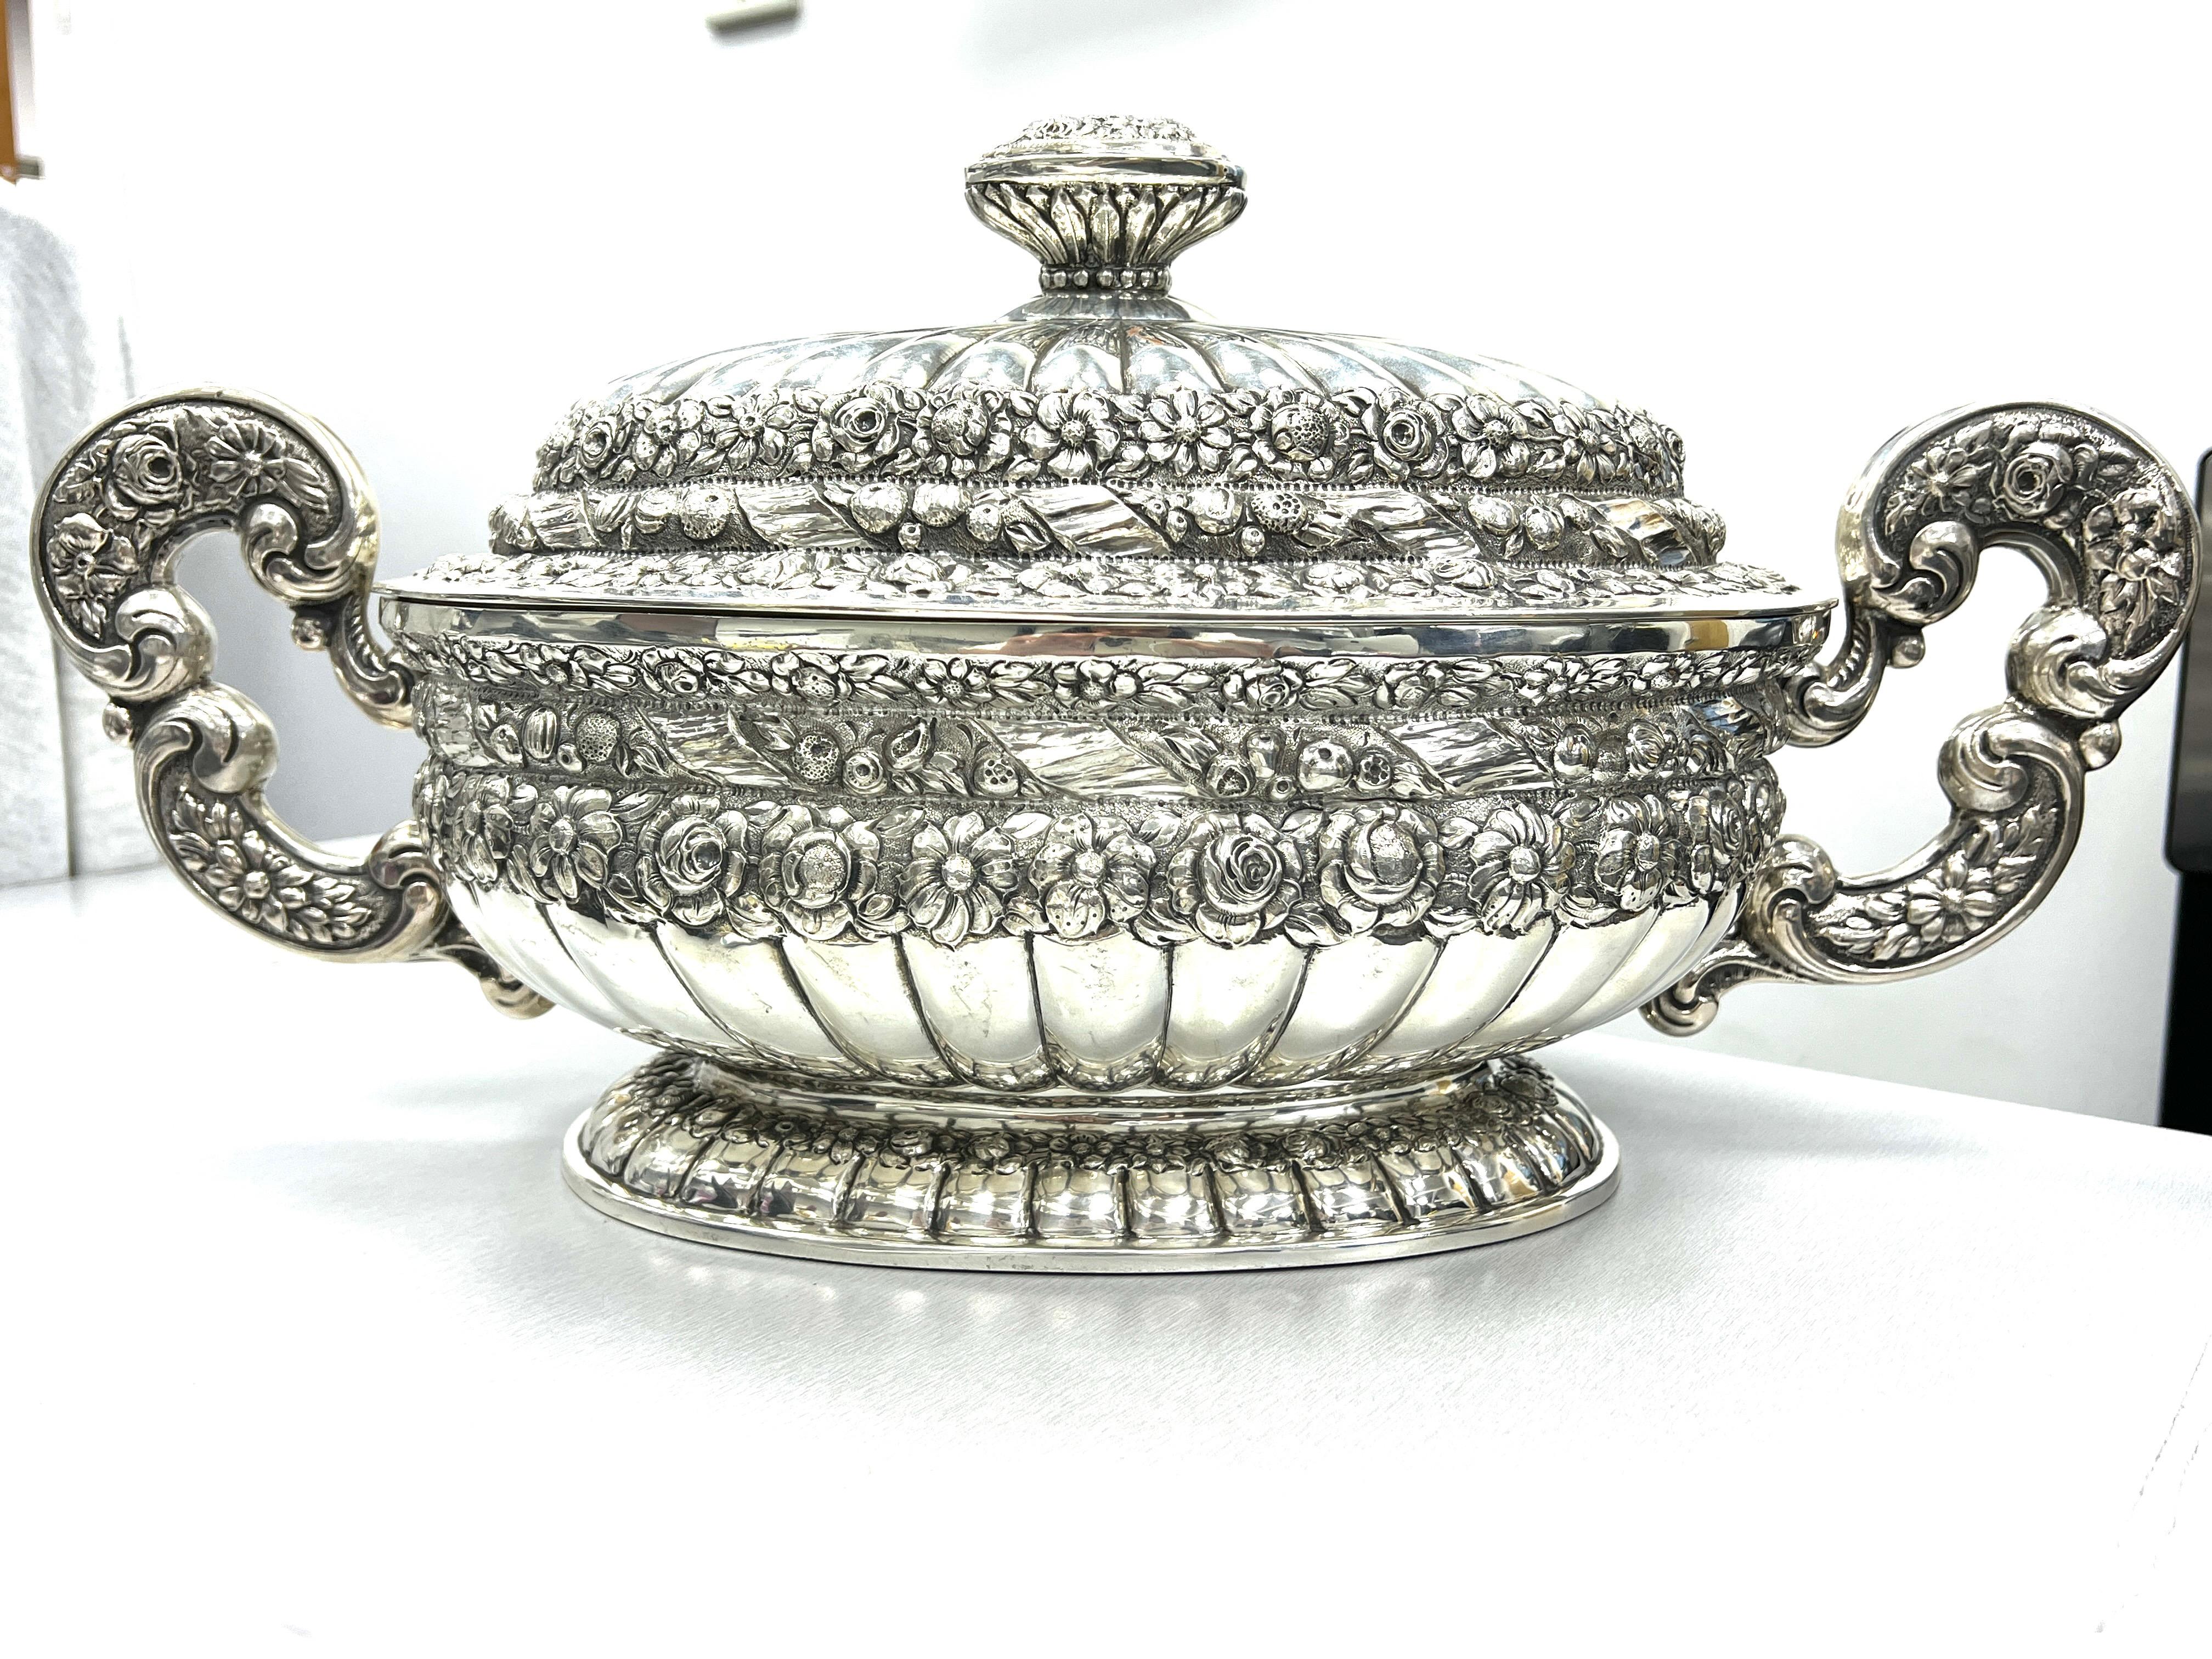 Buccellati silver double handle bowl, circa 1900s

A magnificent work of handmade sterling silver bowl, featuring double handles and flowers motif; marked Buccellati, Made in Italy, 925

Size: width with handles 22 inches, width of bowl 14.5 inches,